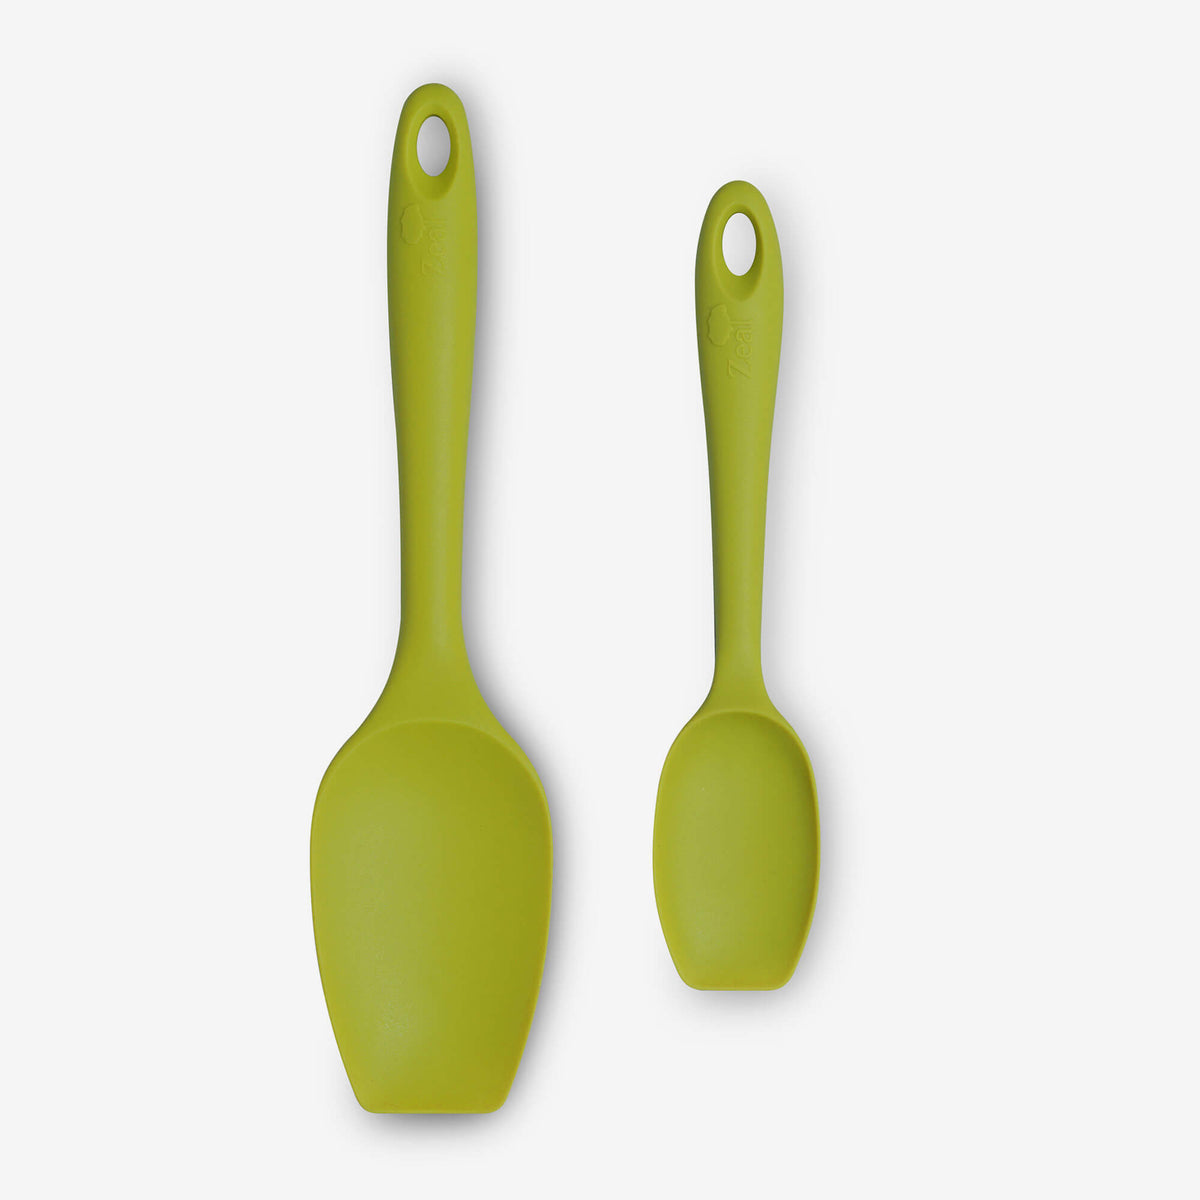 https://cdn.shopify.com/s/files/1/0614/9131/4841/products/zeal-jset1_silicone-spoons-set-of-2-in-lime_1200x.jpg?v=1662115492